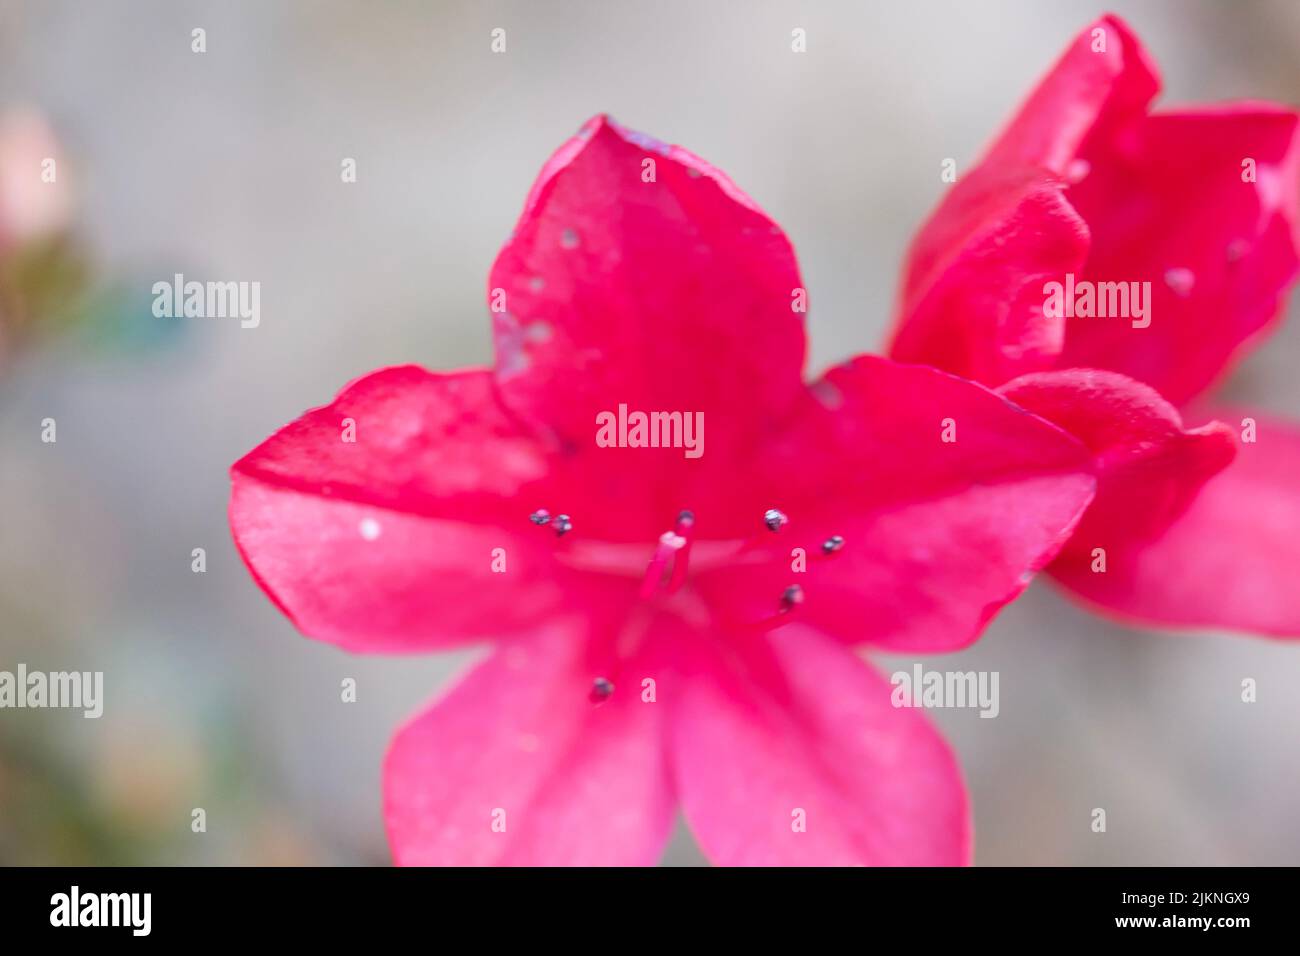 A closeup of a Rhododendron flower Stock Photo